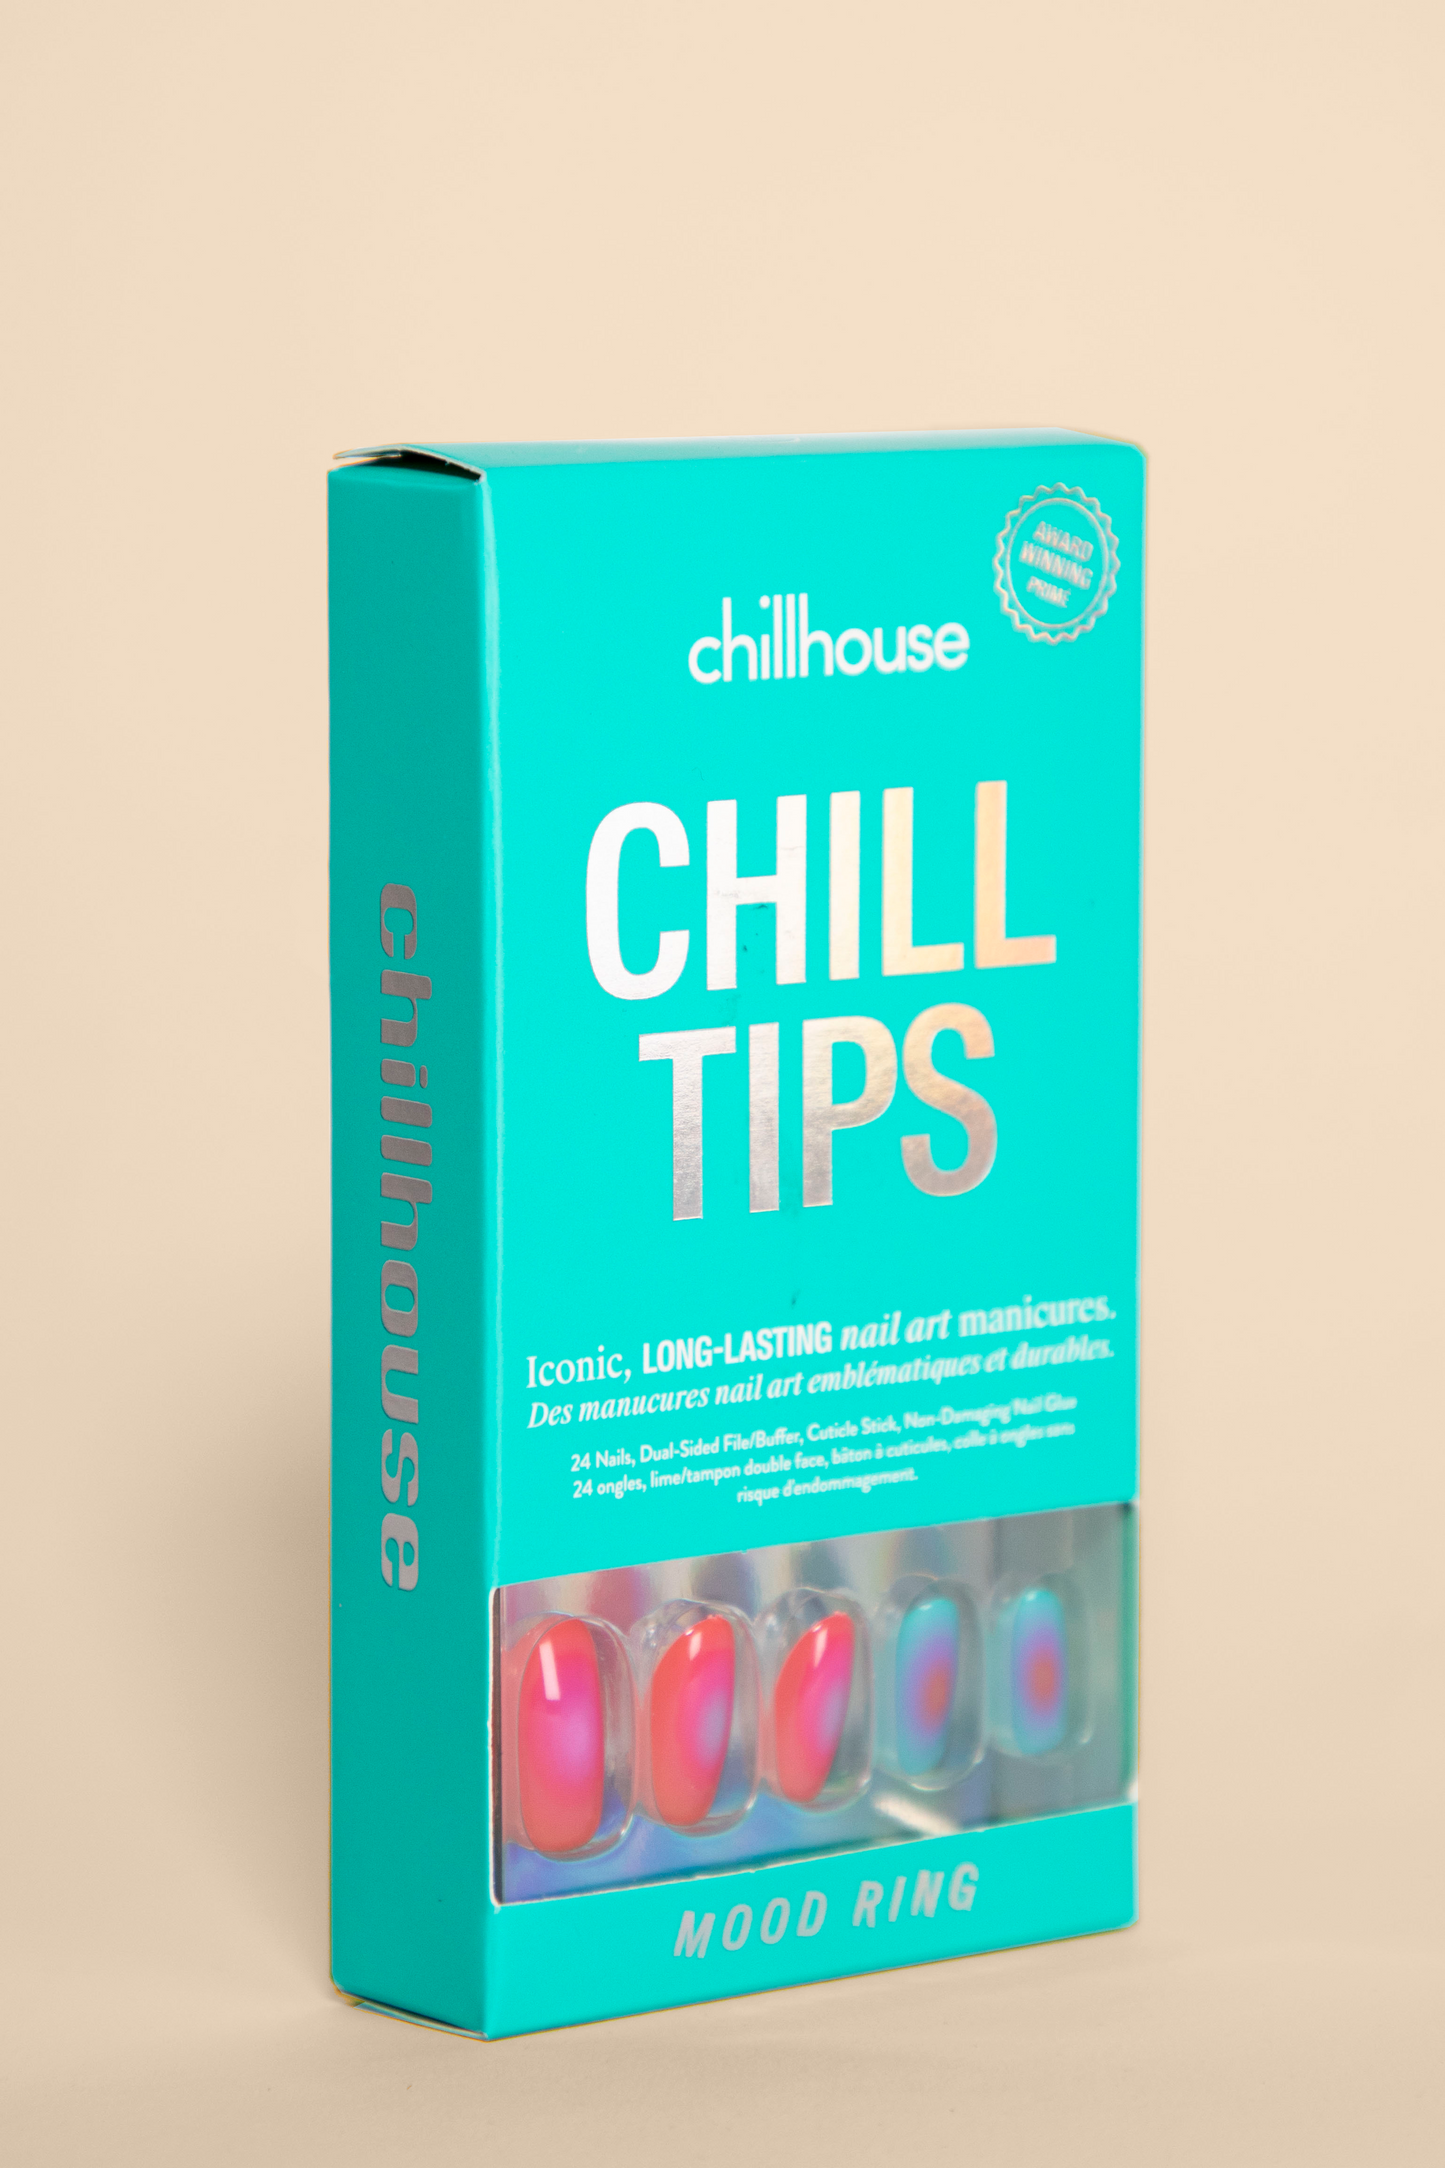 Chill Tips Mood Ring by Chillhouse